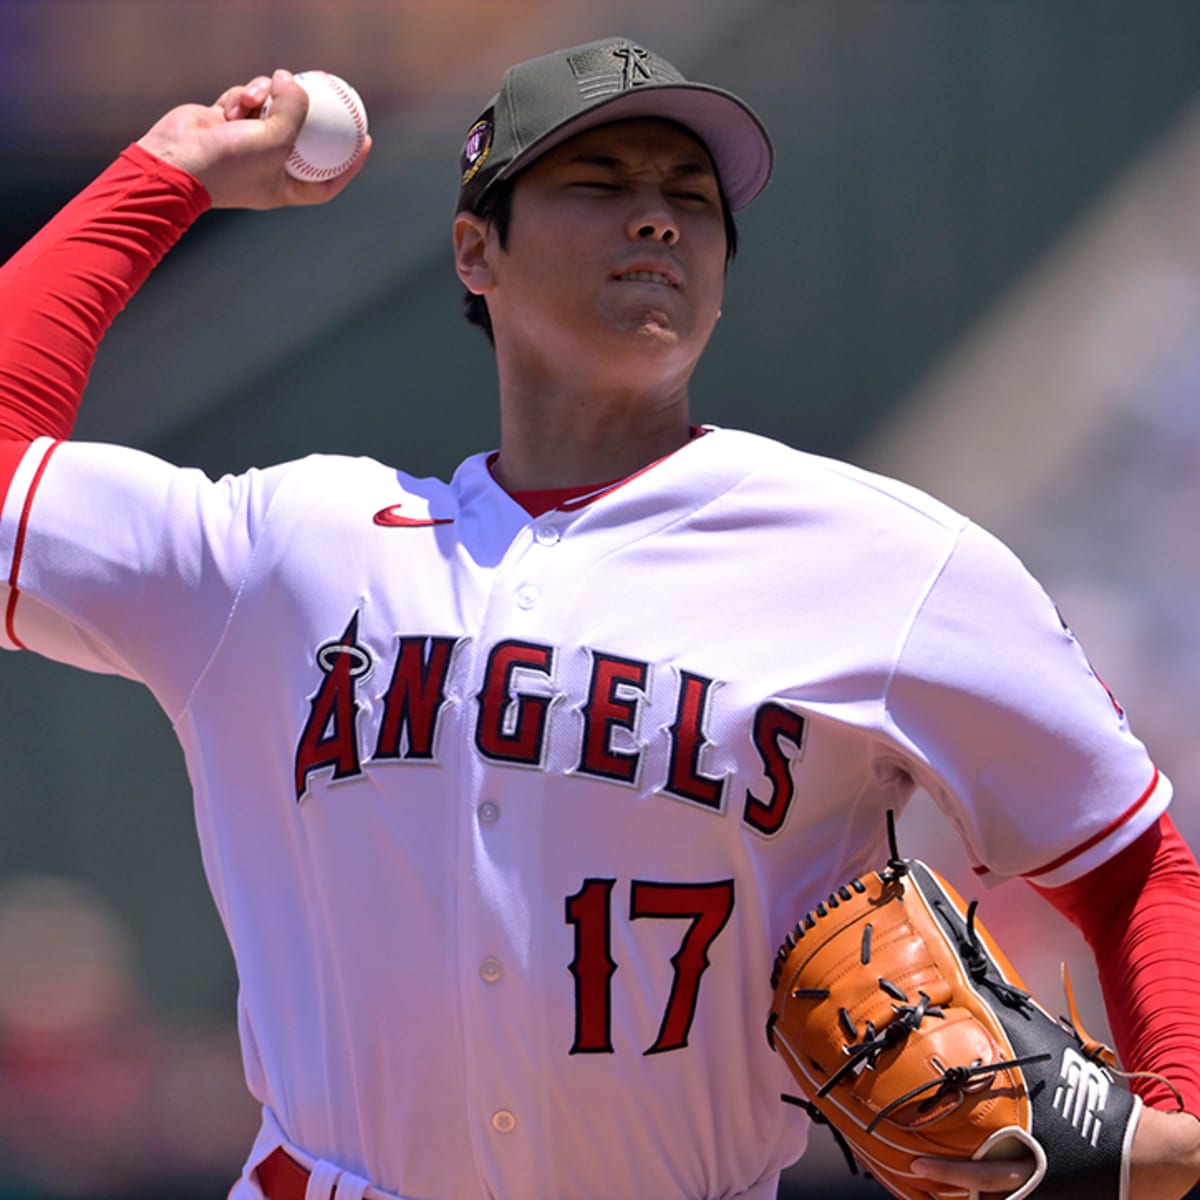 Shohei Ohtani struck out against Clayton Kershaw and all he could do was  laugh